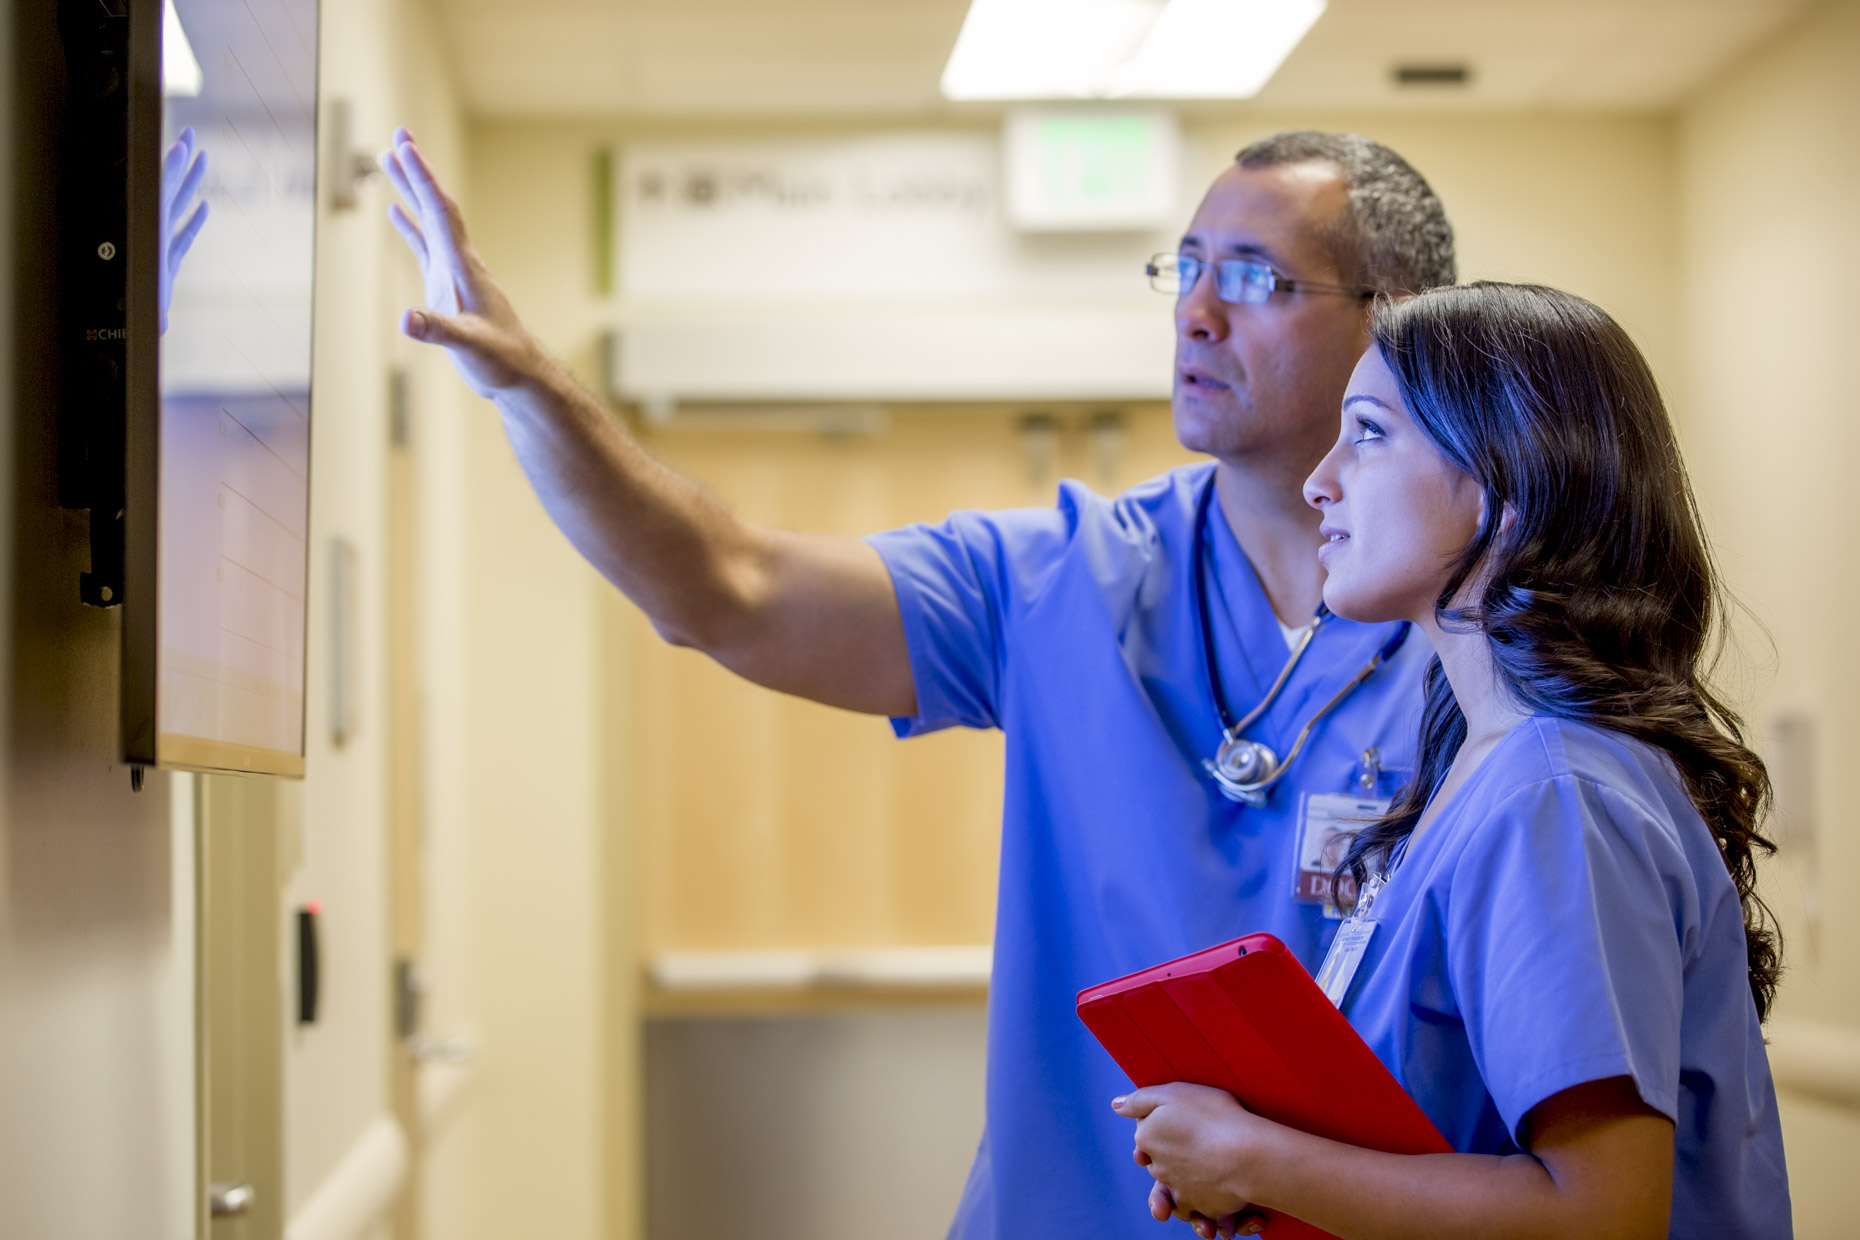 Doctor and nurse discussing patient care information on monitor in hospital